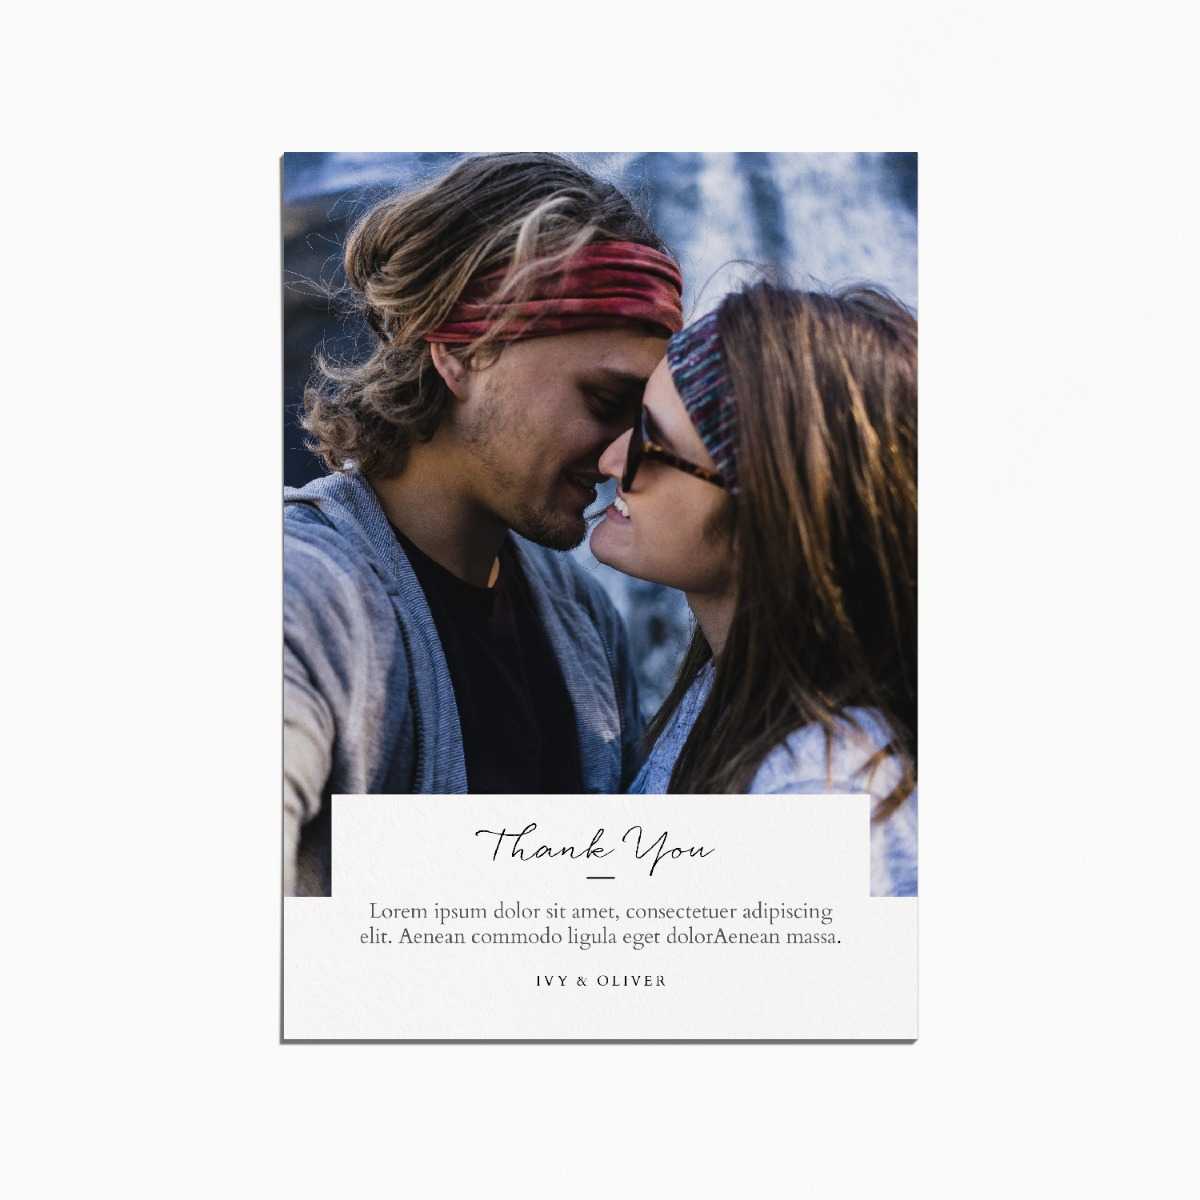 thank you card with an image of a couple embracing